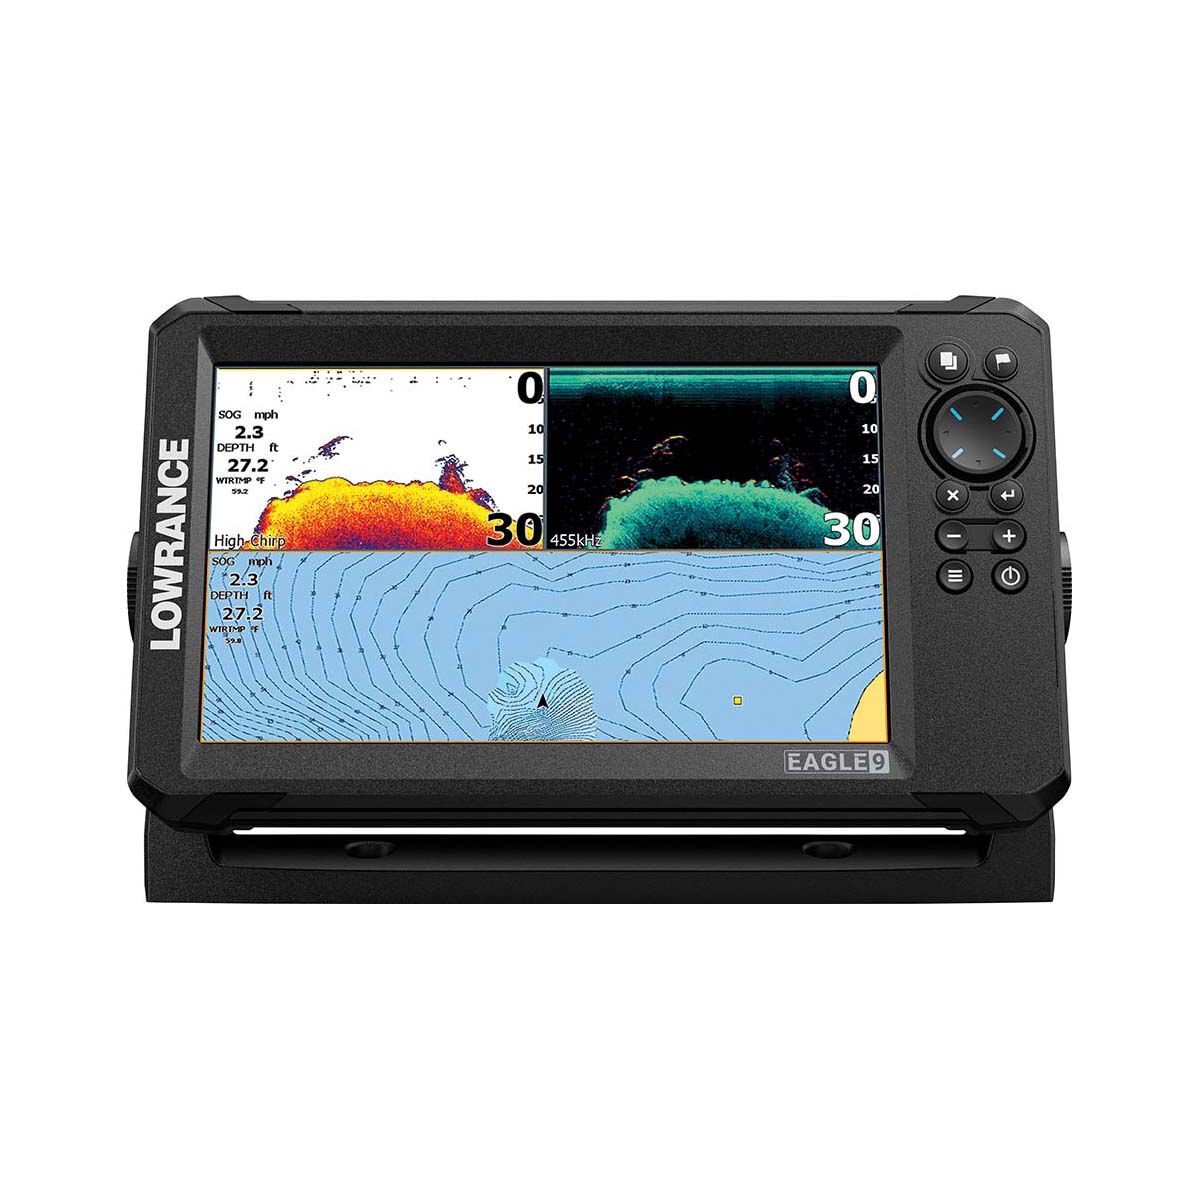 Lowrance Eagle 9 Aus/NZ Fish Finder Combo with Tripleshot Transducer, , bcf_hi-res